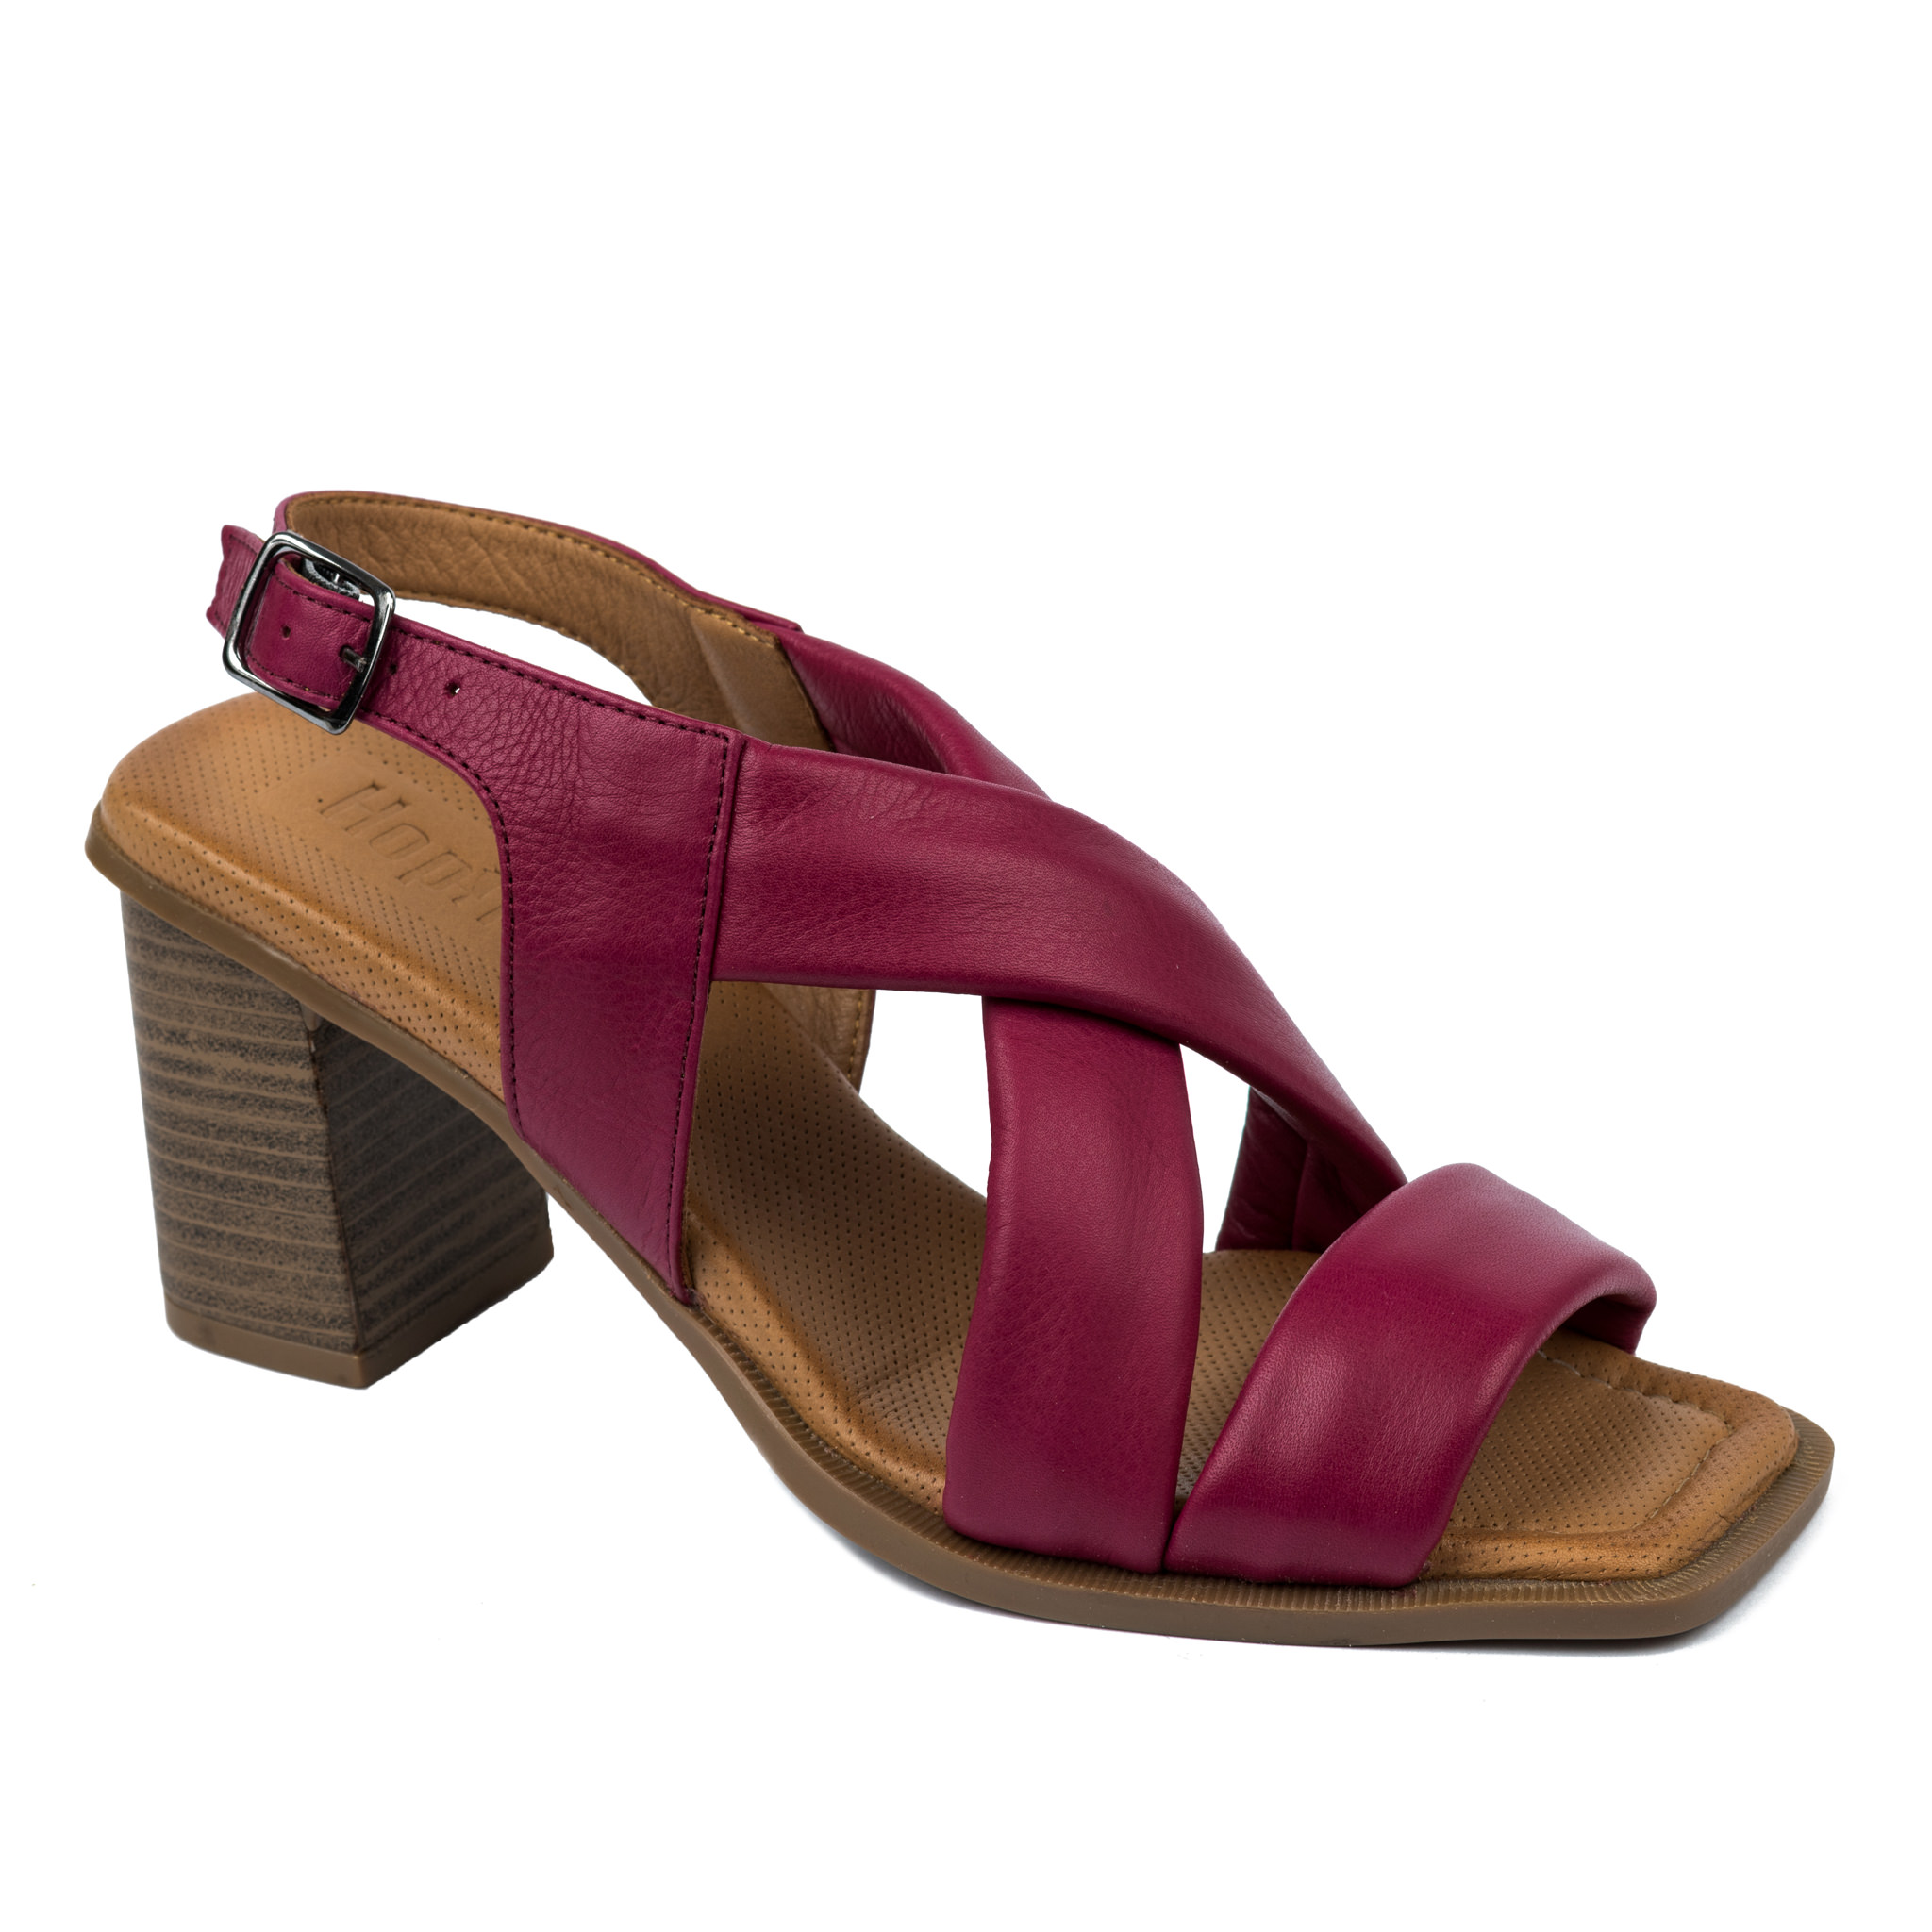 Leather sandals A671 - PINK